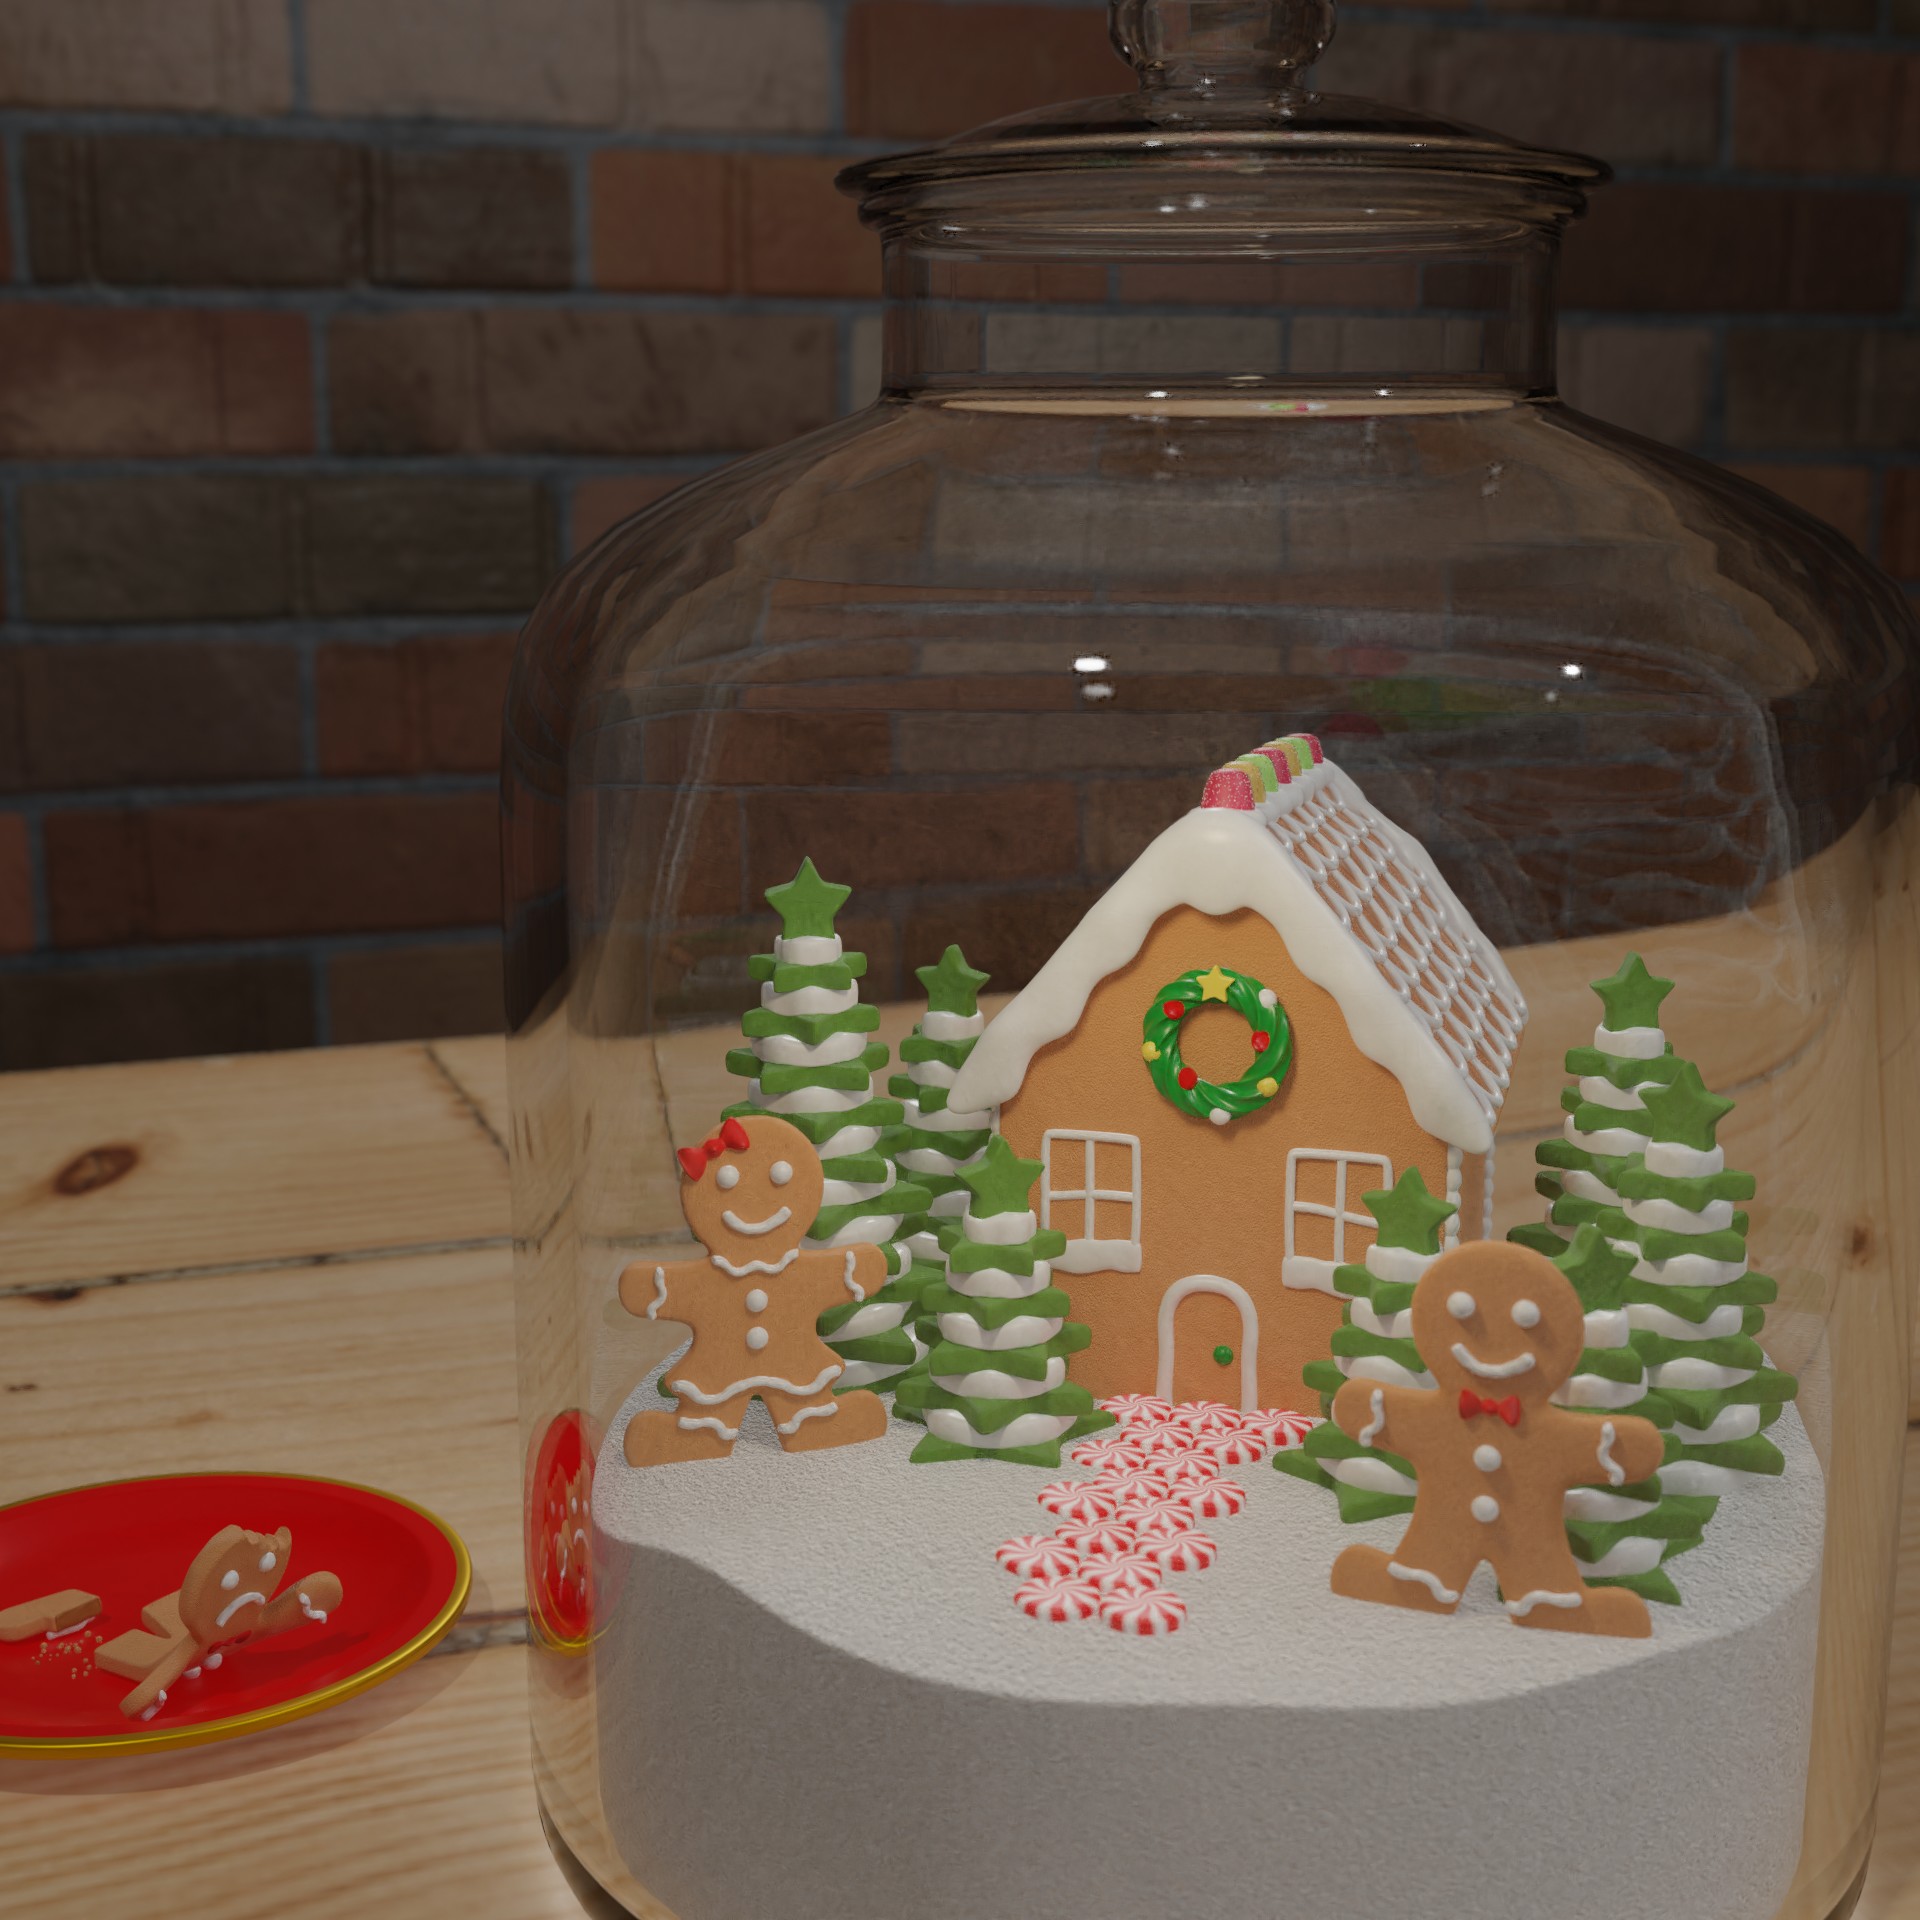 World in a bottle submission. Gingerbread house and people in a glass bottle